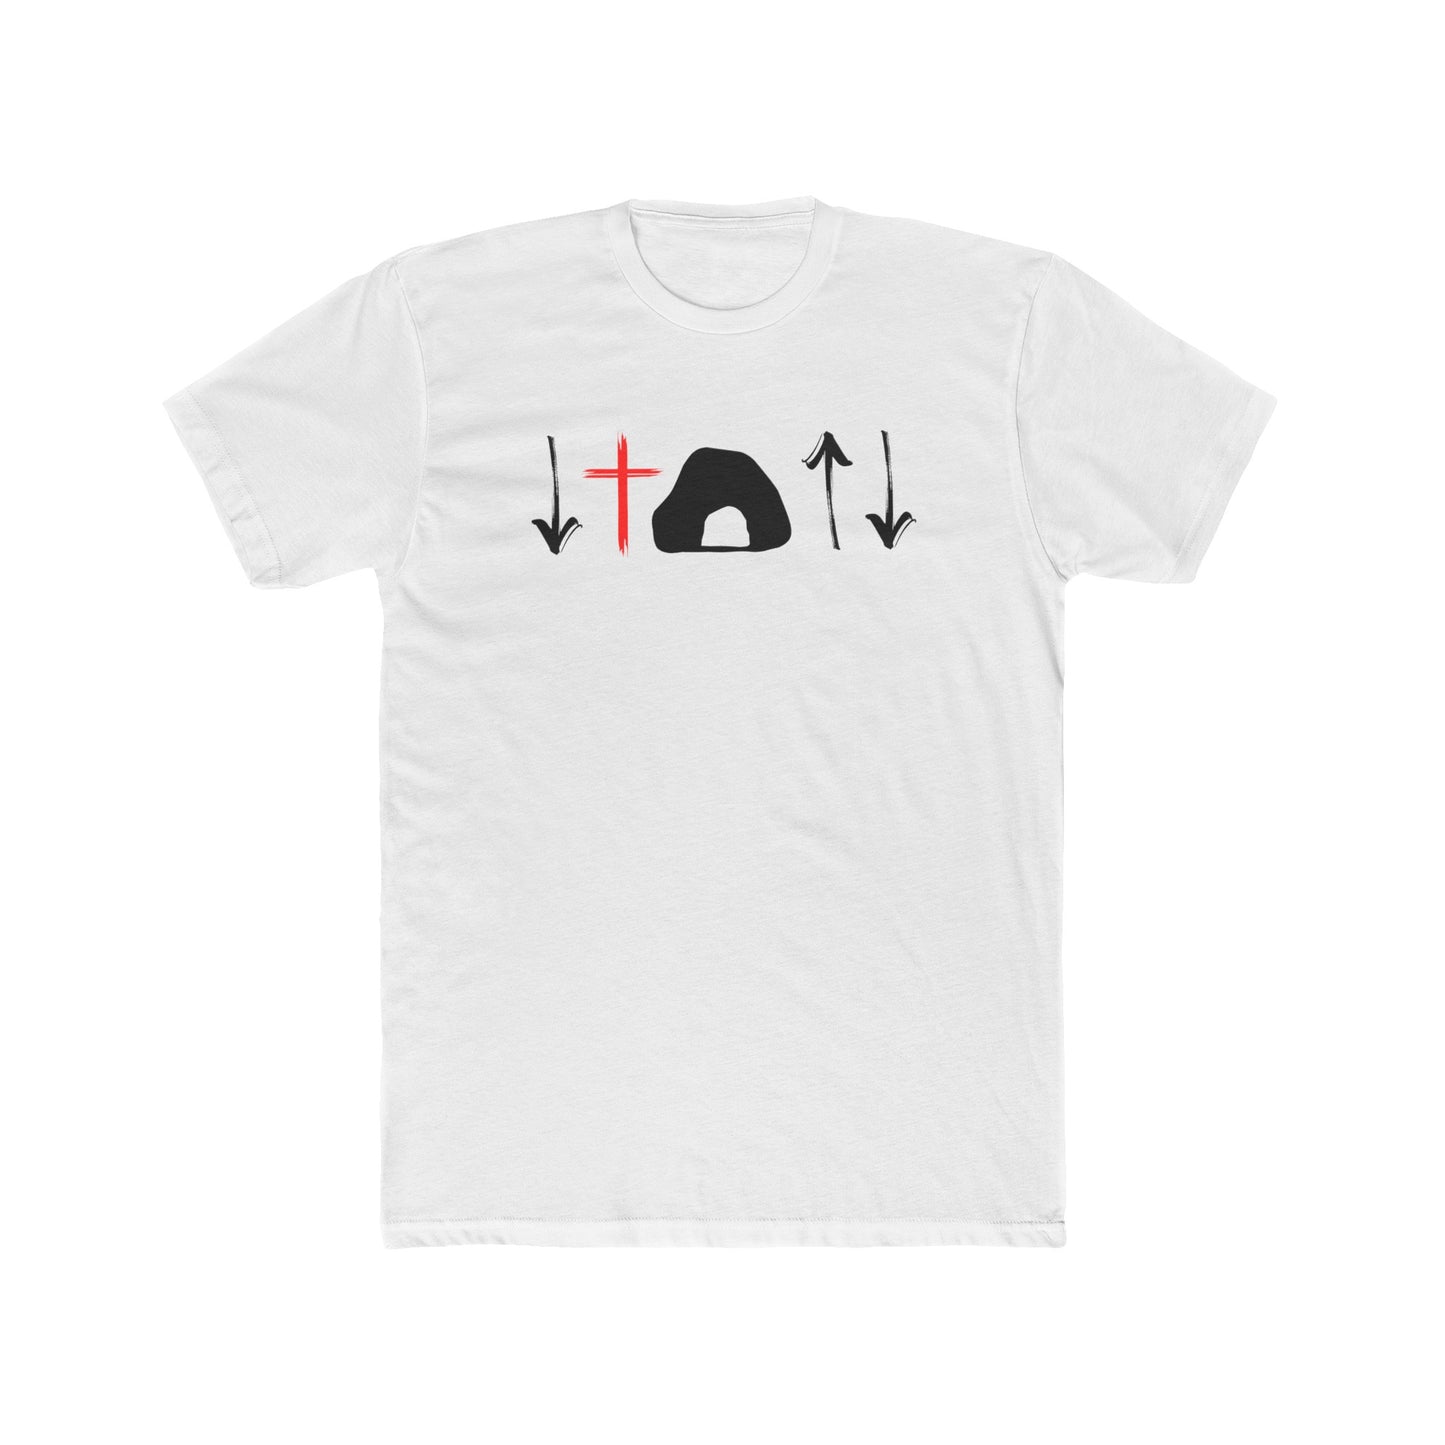 Story of Redemption Tee